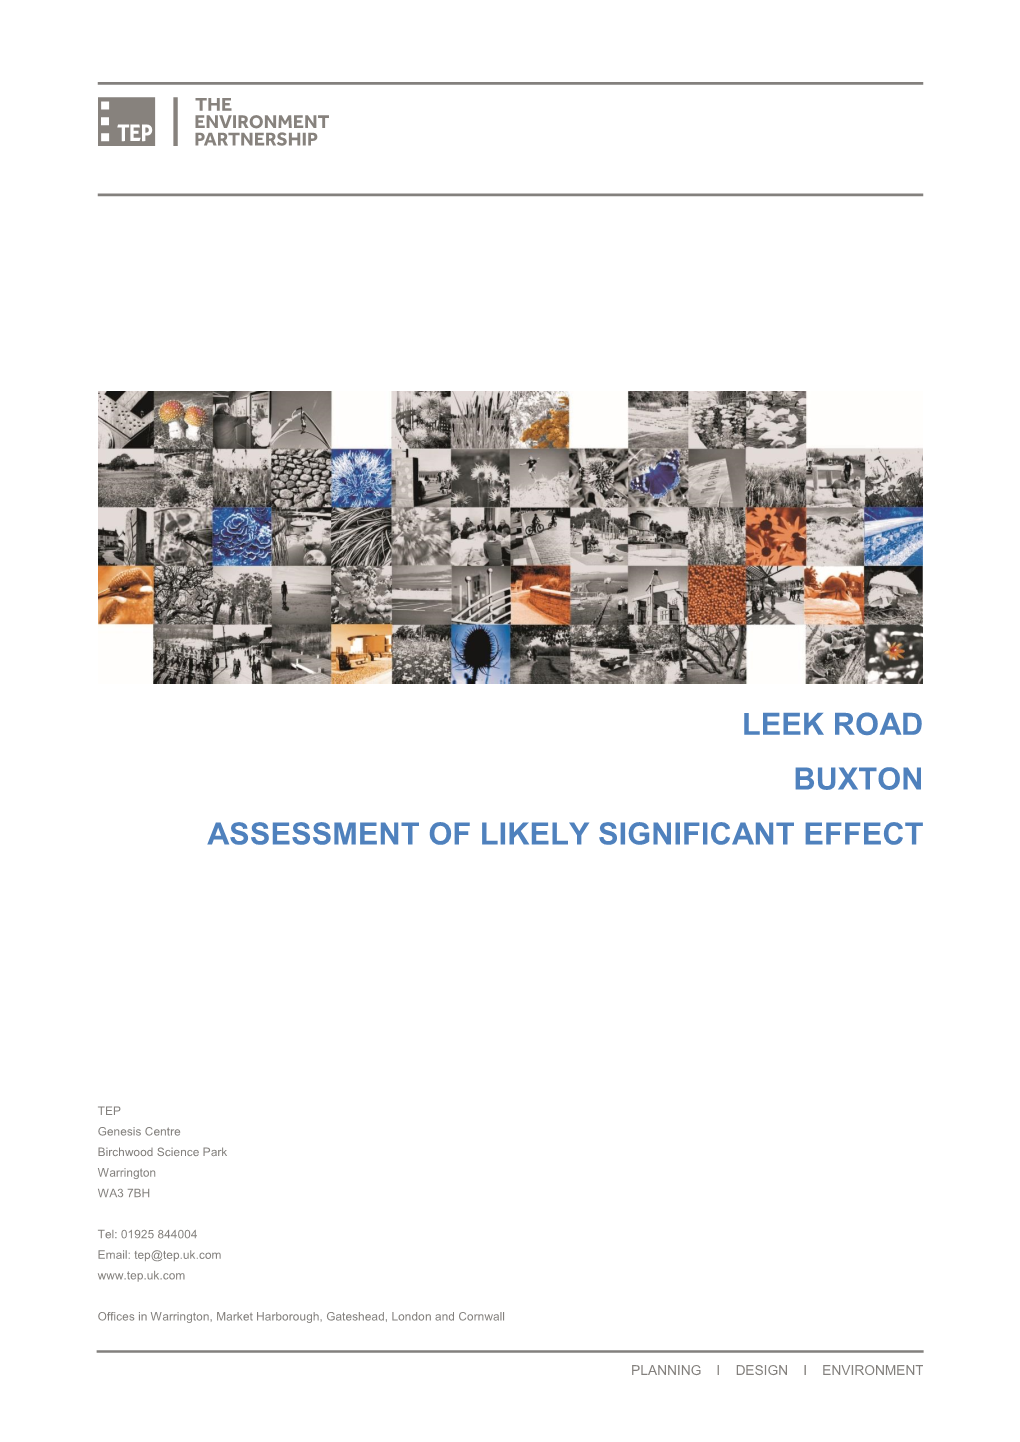 Assessment of Likely Significant Effect